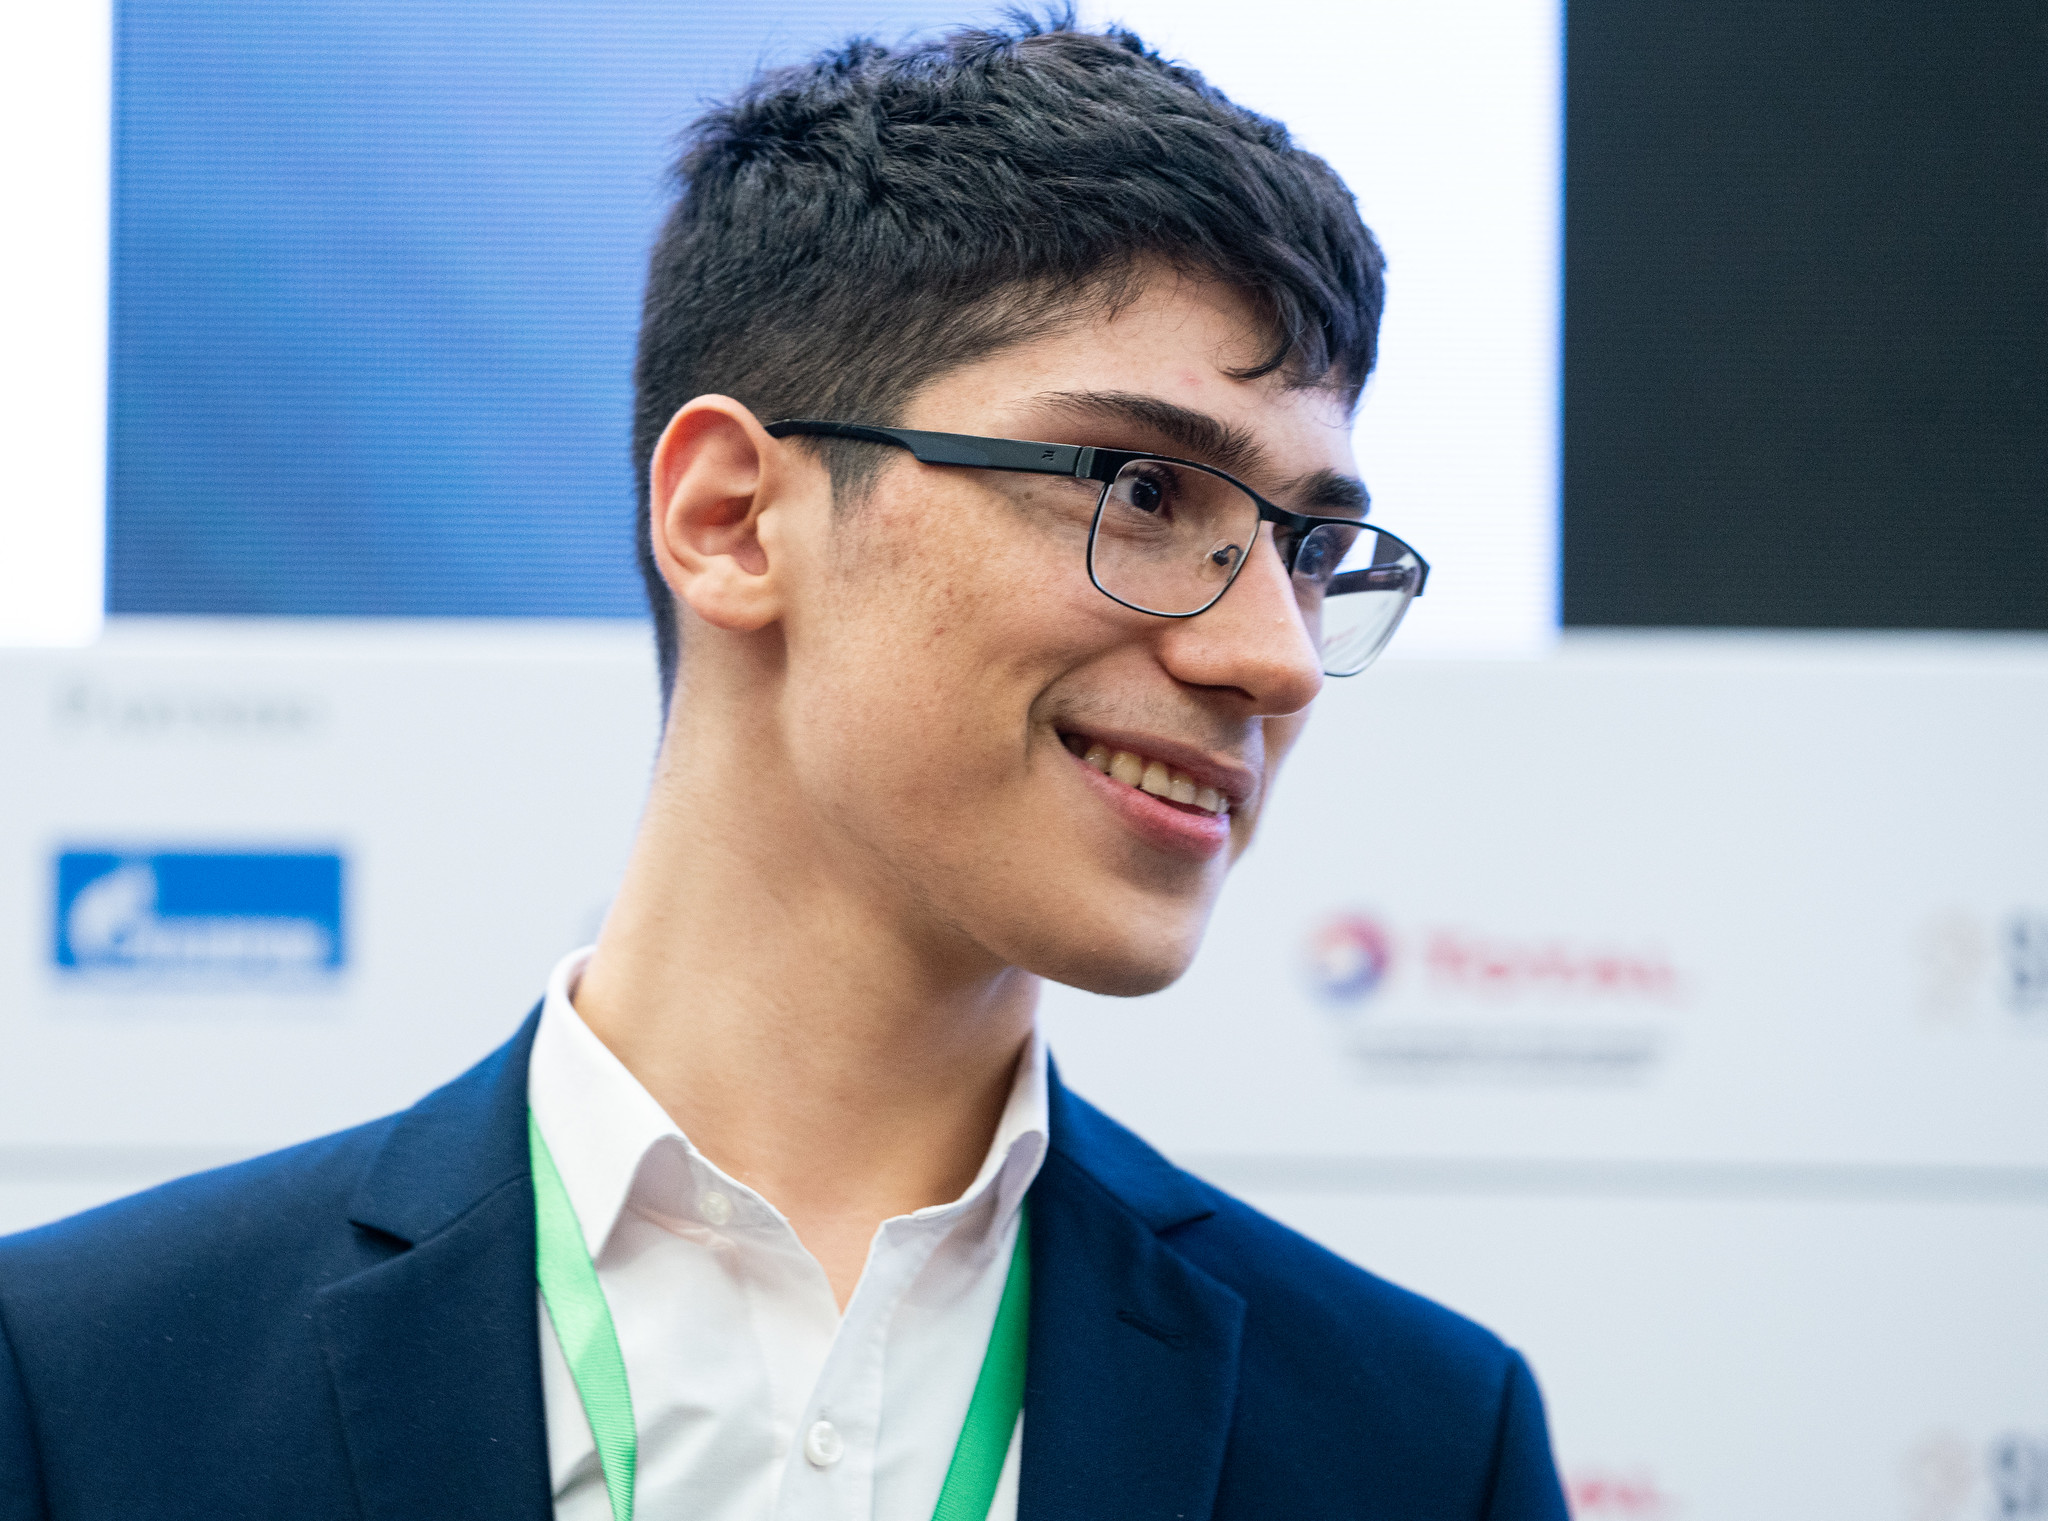 FIDE - International Chess Federation - Happy birthday to GM Alireza  Firouzja, who turns 19 today! 🎉🎂 The world #3 became a GM at the age of  14 and is the youngest